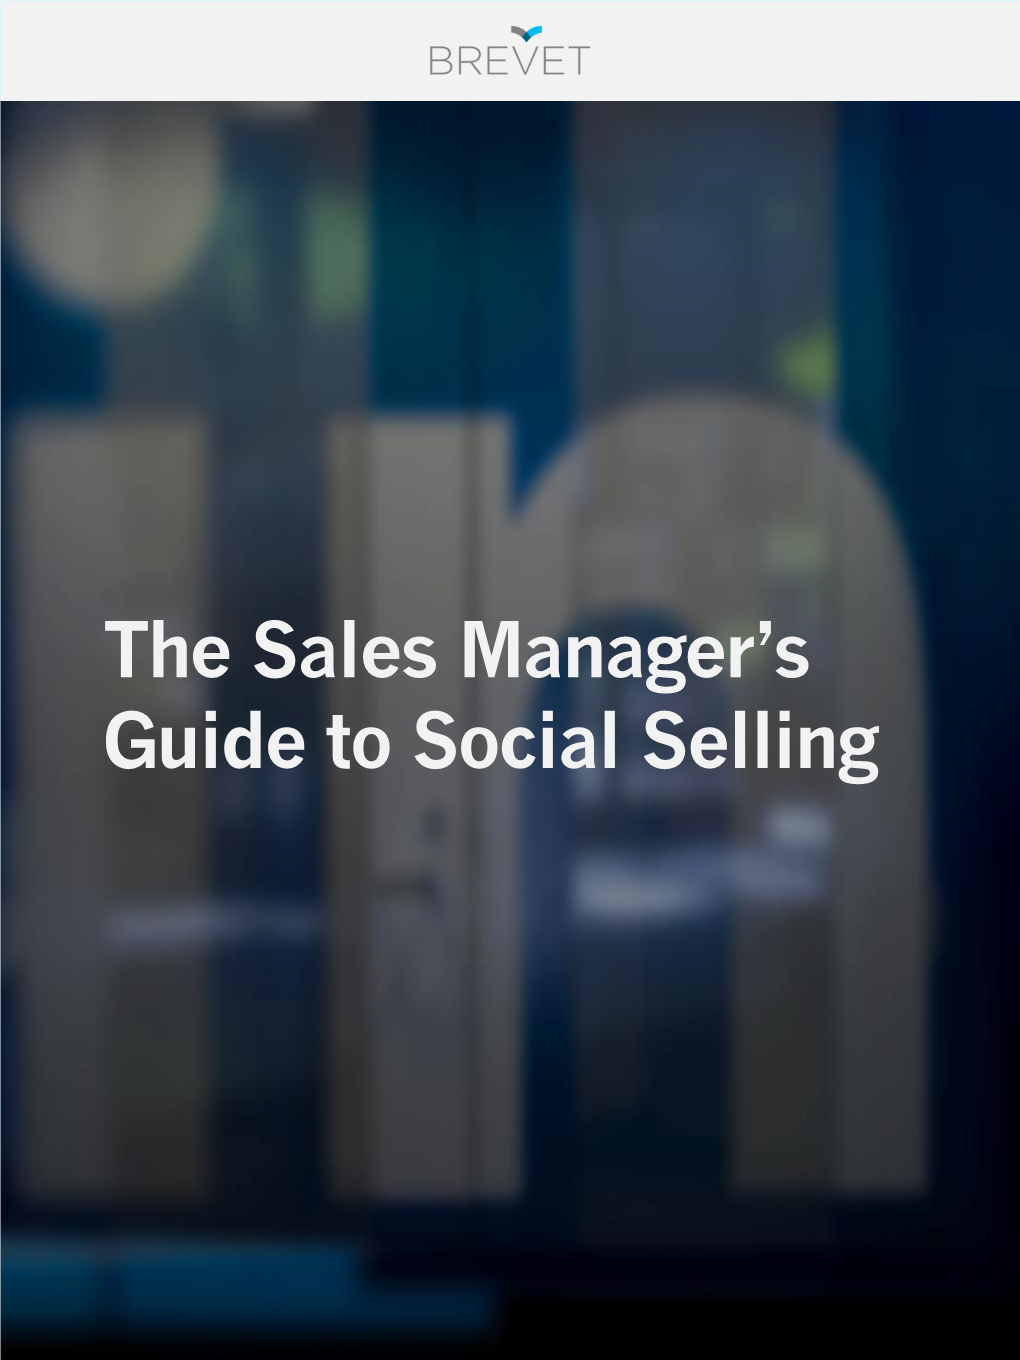 The Sales Manager's Guide to Social Selling